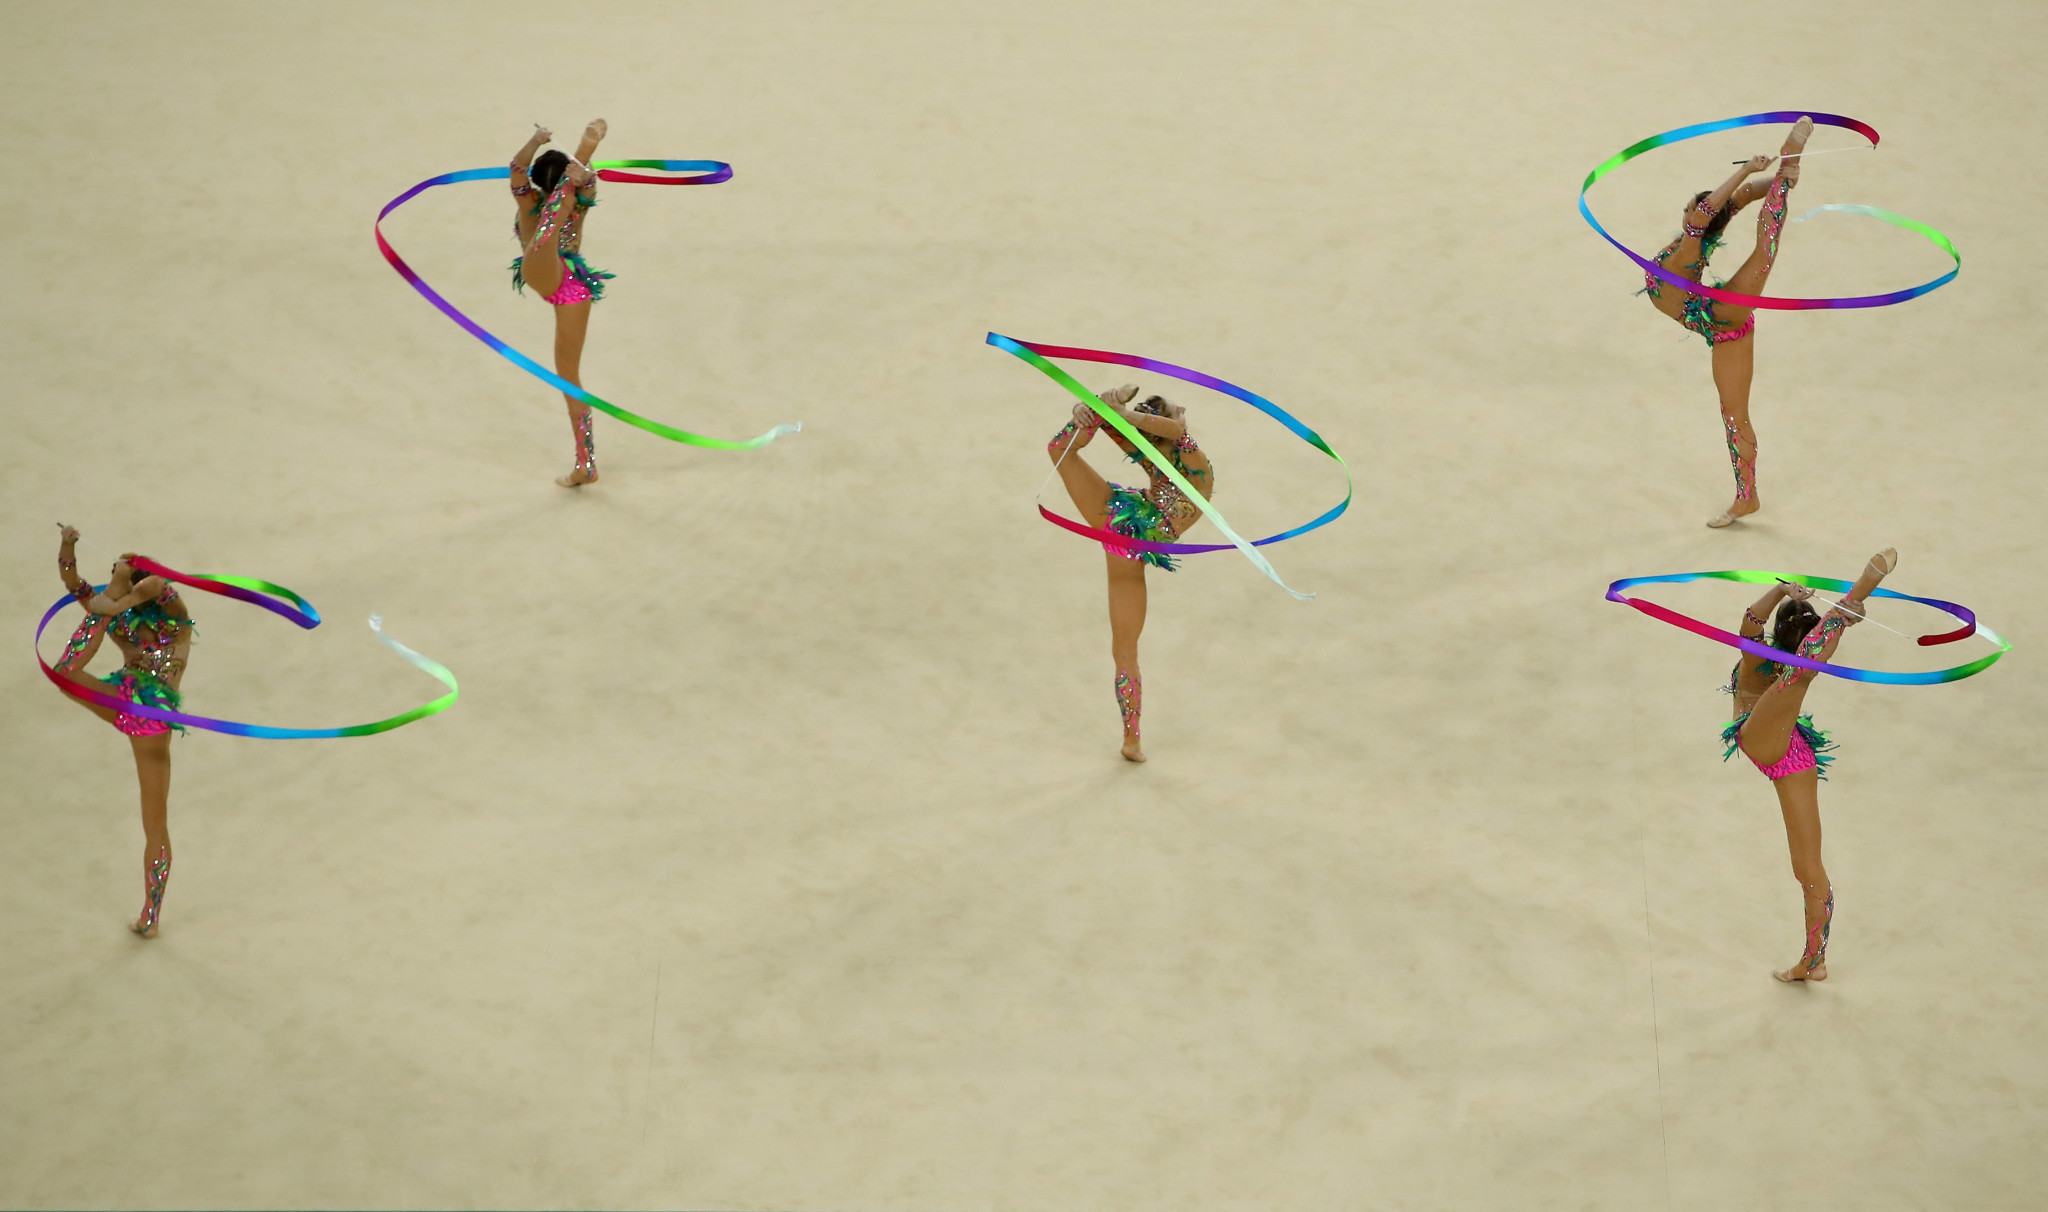 Russia will not compete at this year's Rhythmic Gymnastics European Championships ©Getty Images